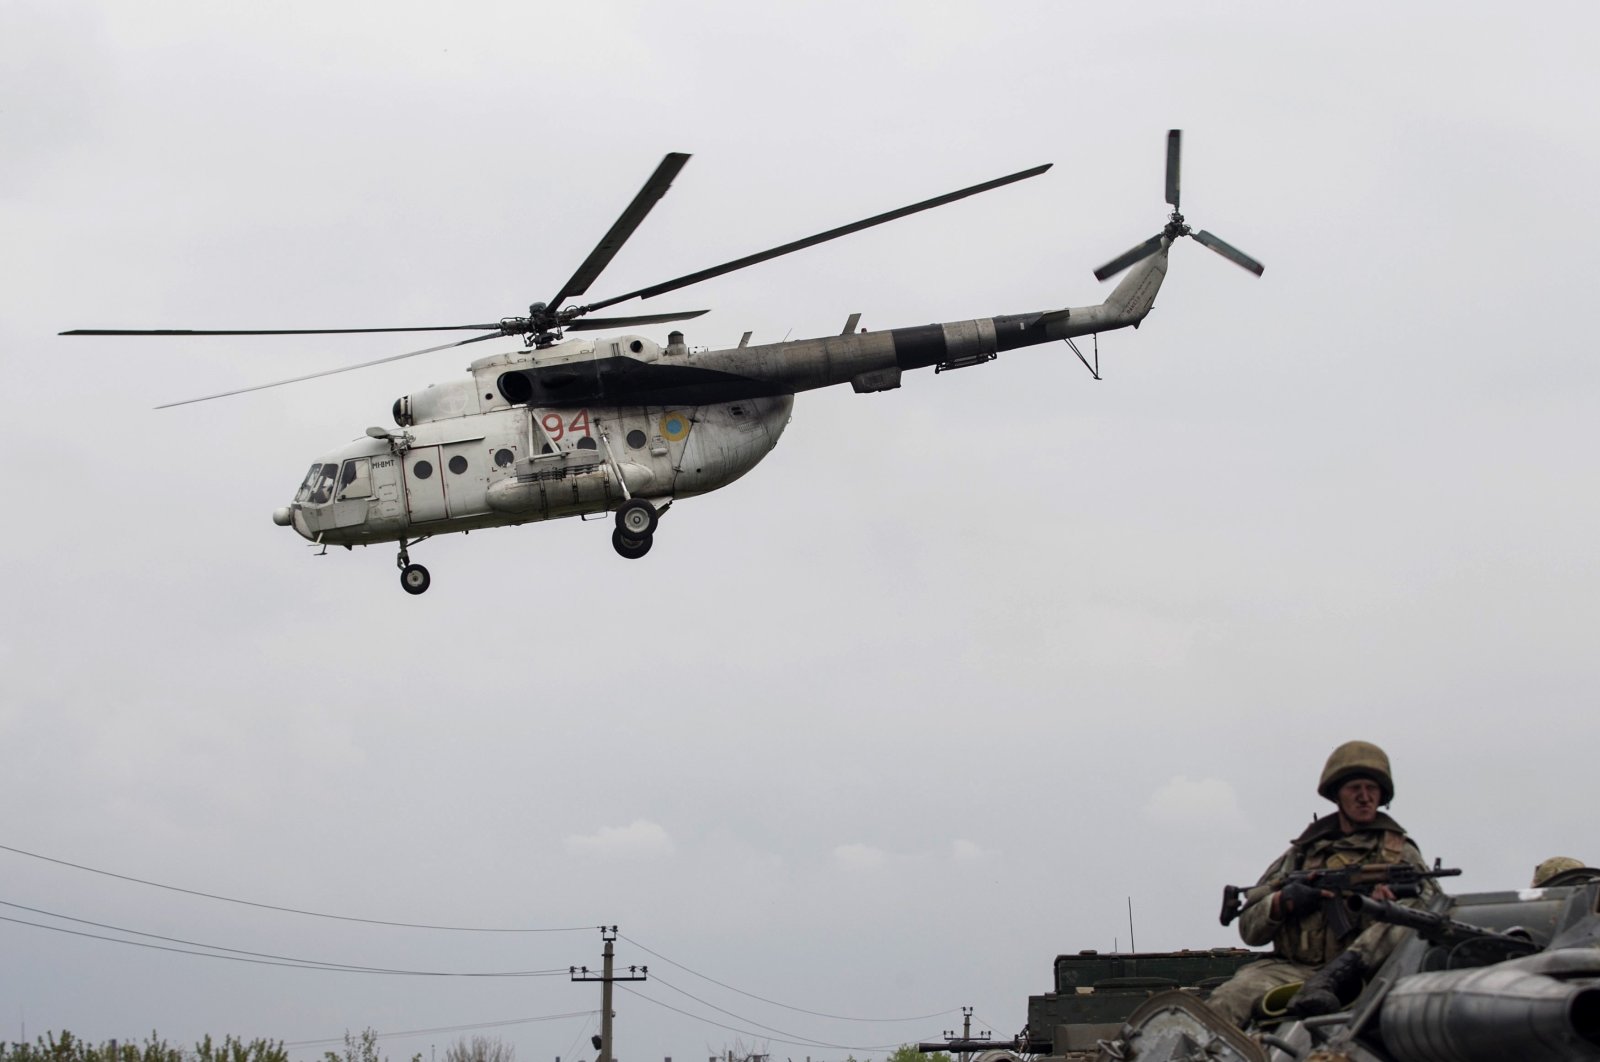 A Ukrainian military helicopter flies over a Ukrainian checkpoint near the town of Slaviansk in eastern Ukraine, May 2, 2014. (Reuters Photo)